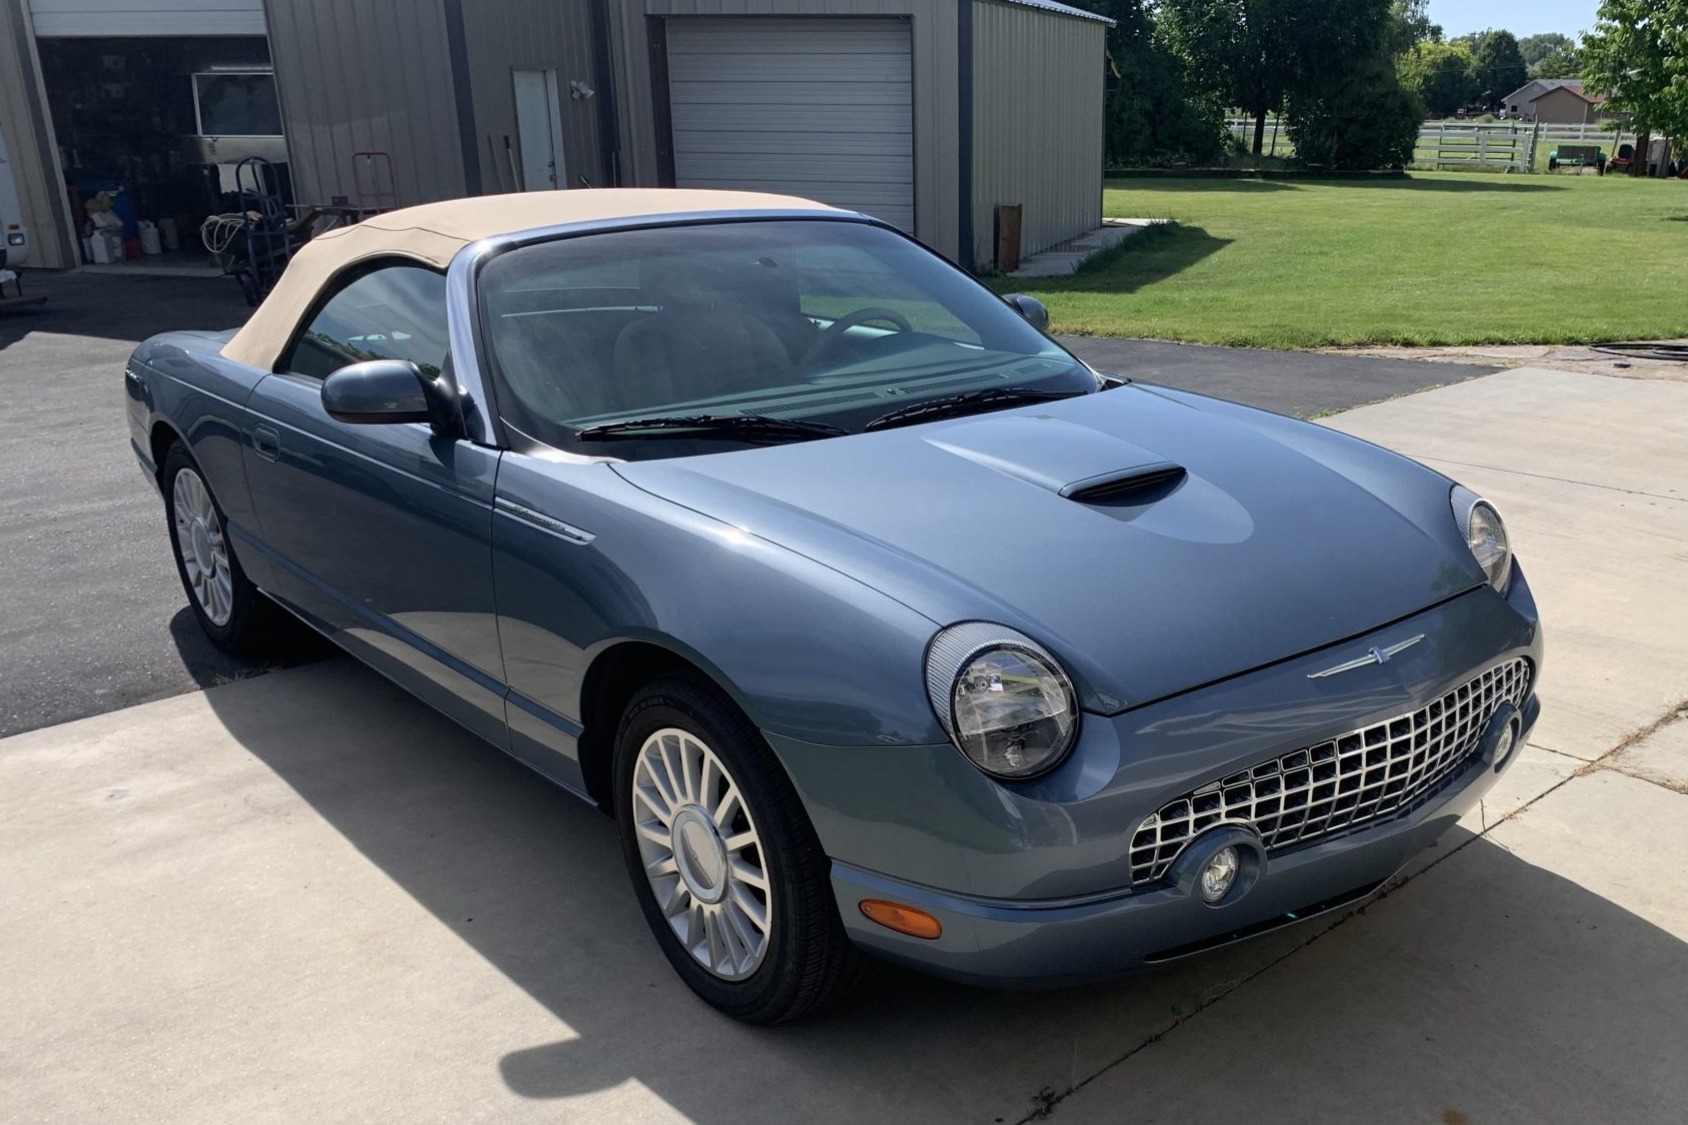 Used Original-Owner 2005 Ford Thunderbird Review